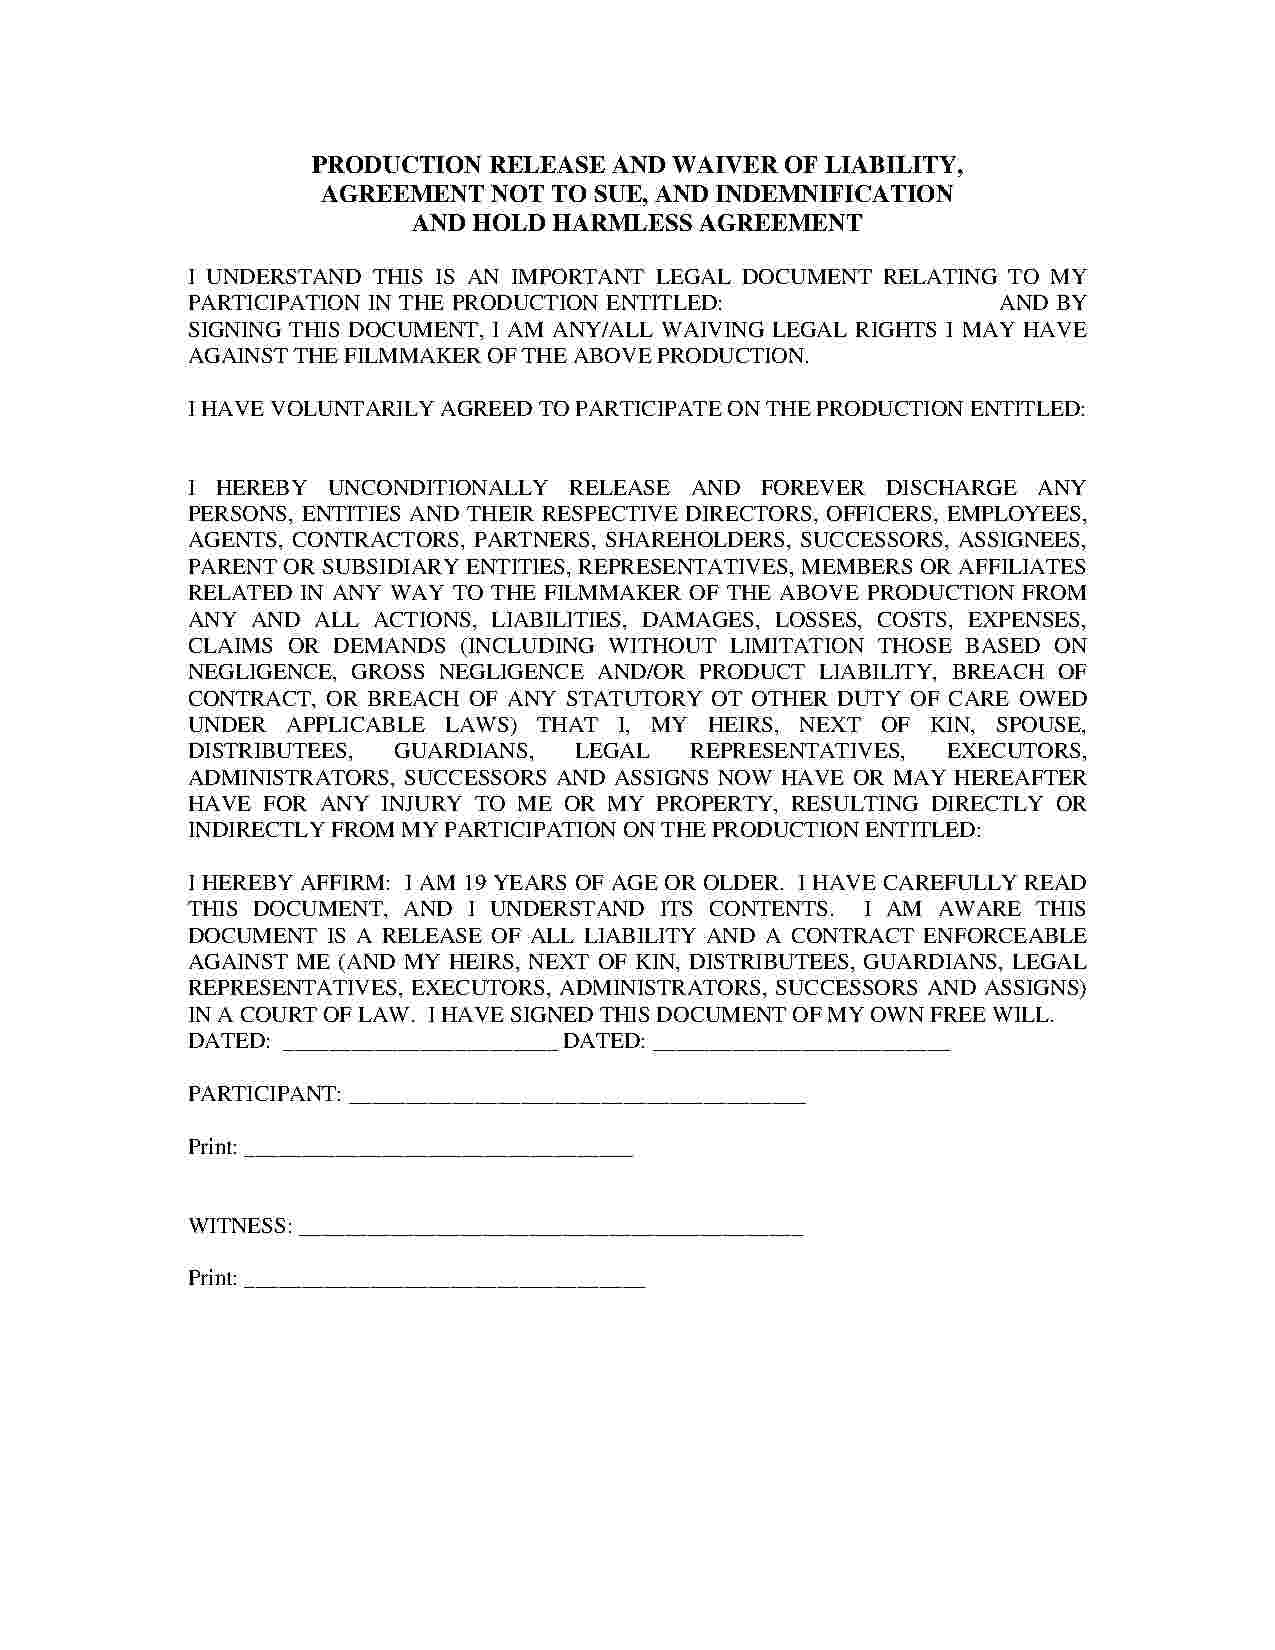 Liability Release Agreement Release Of Liability Form Waiver Of Liability Templates Hunter